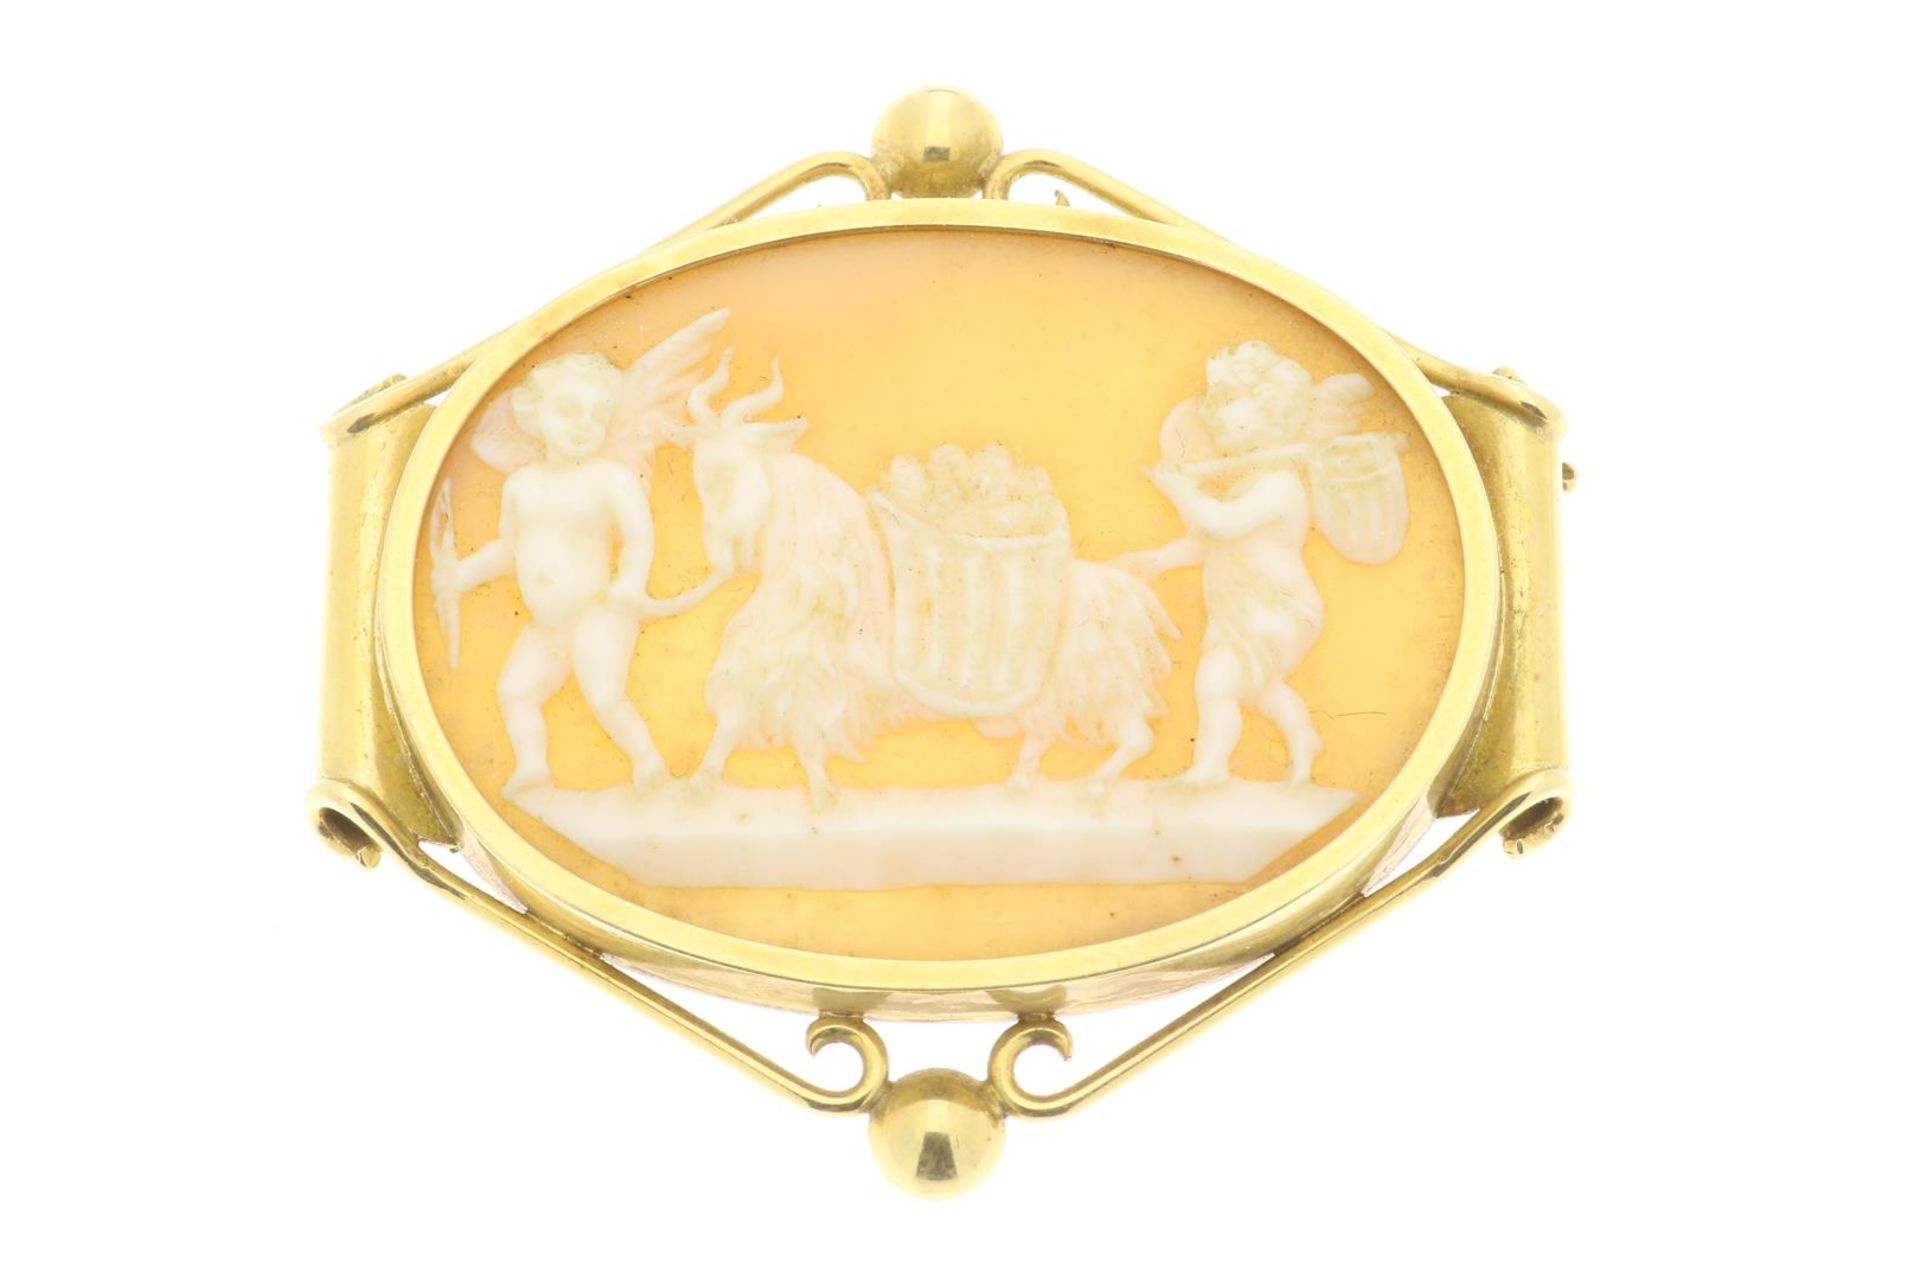 Shell cameo with a decor of Putti and a goat set in an oval gold pin brooch, alloy 585/000, 3 x 4